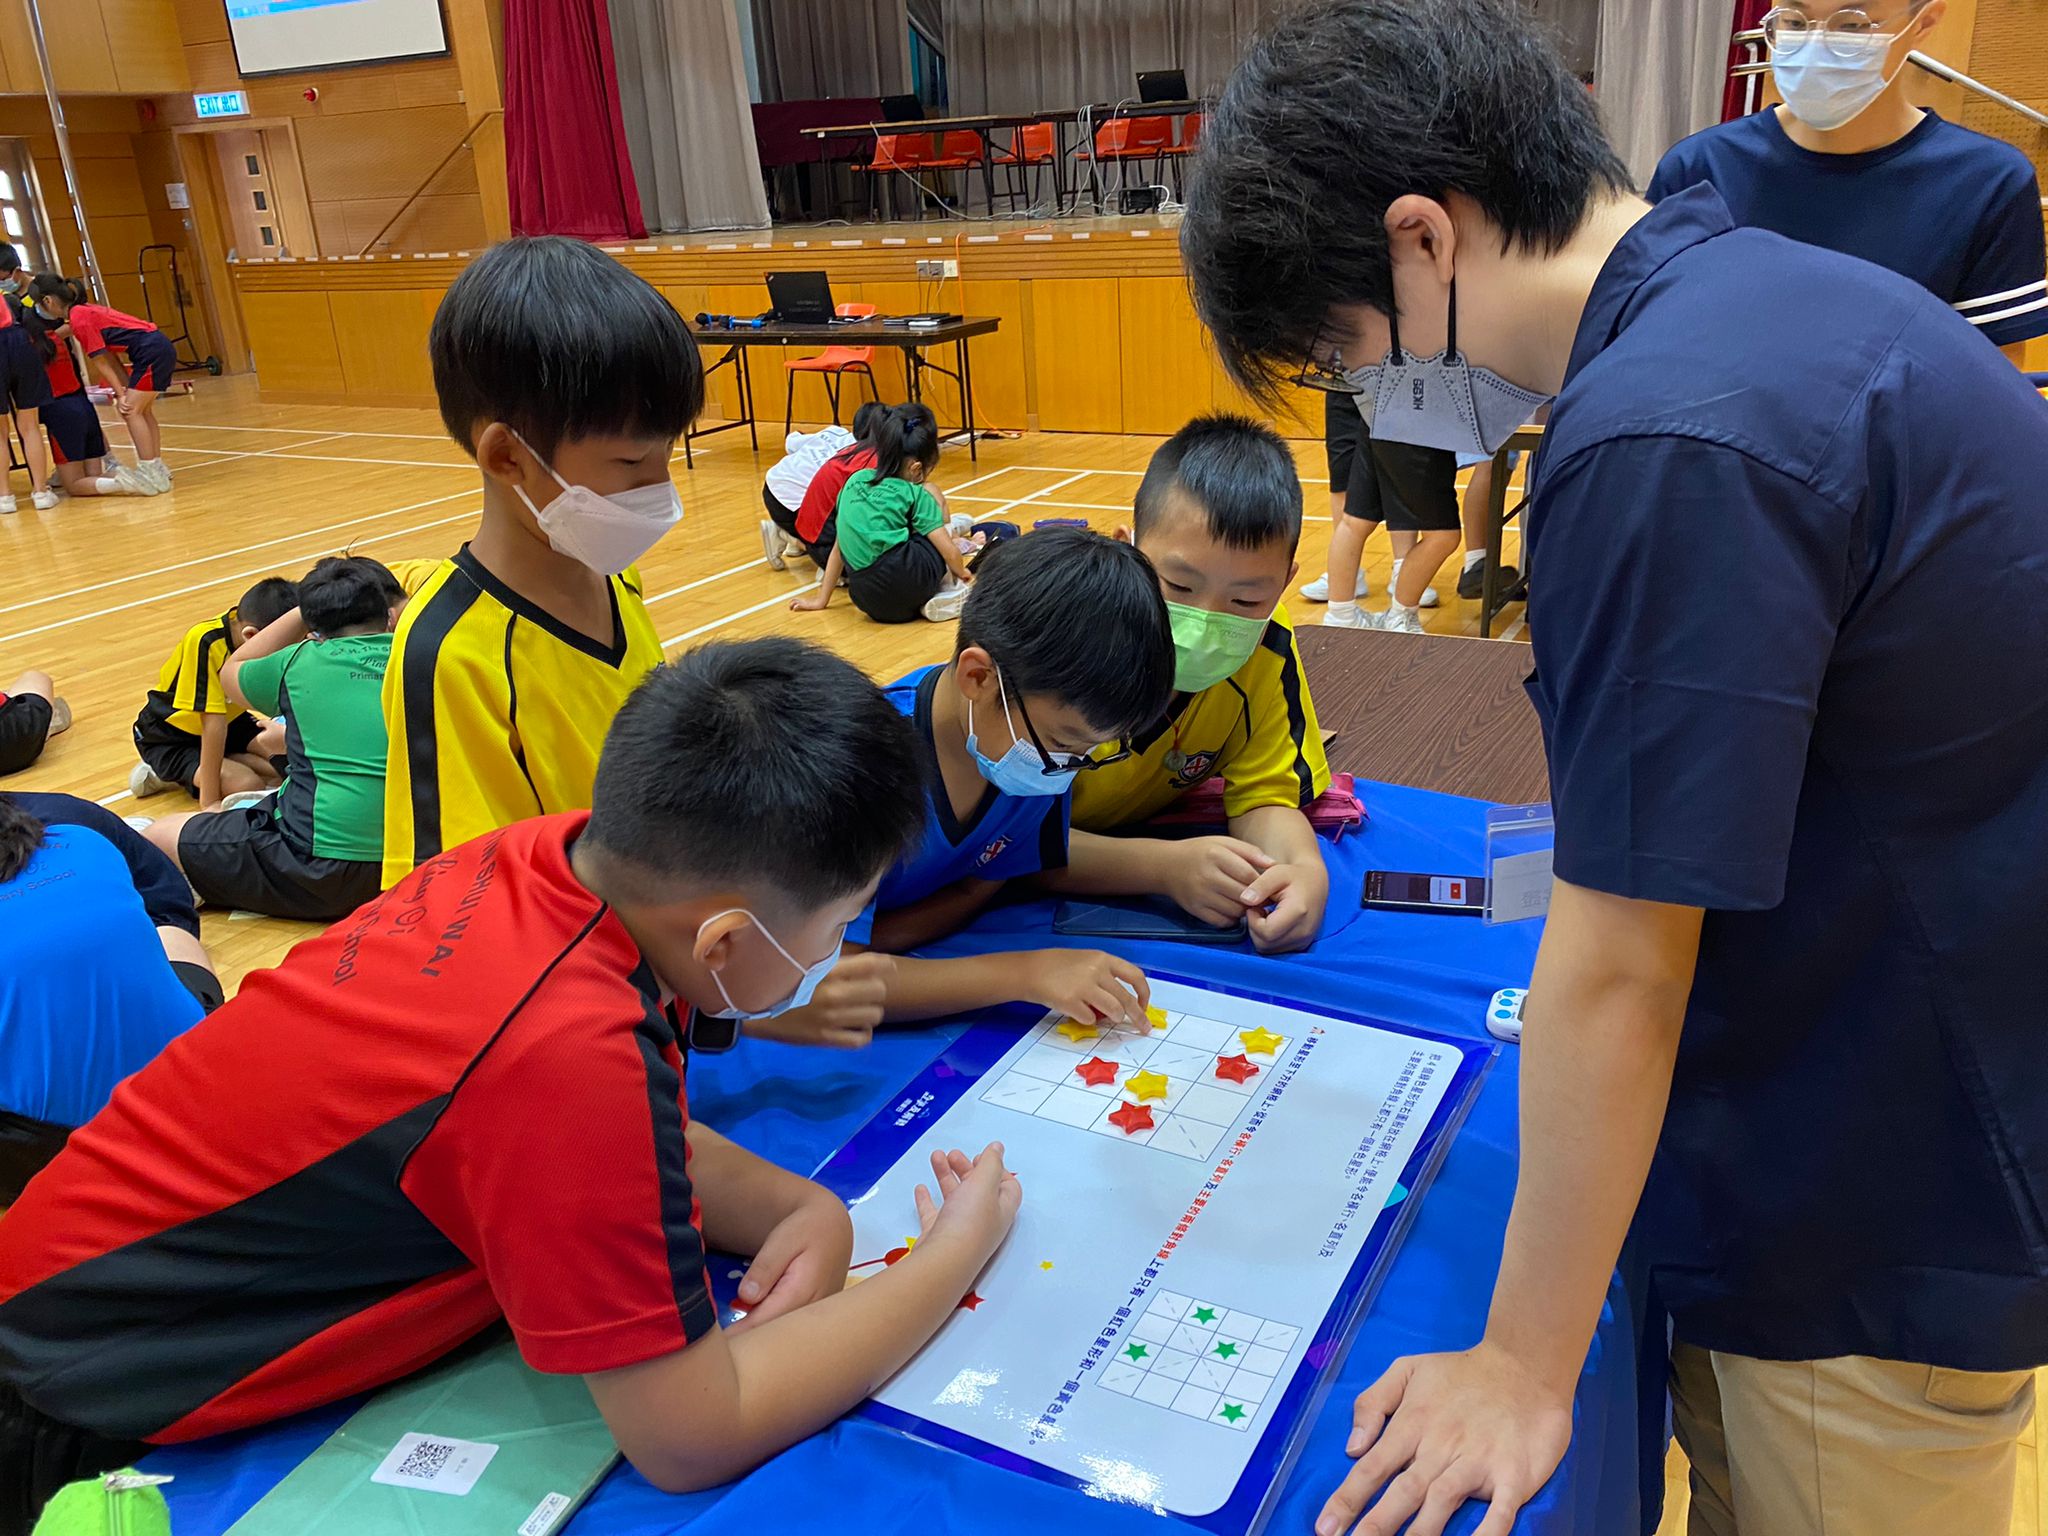 MAD Maths and Problem-solving Fun Day - SKH Tin Shui Wai Ling Oi Primary School